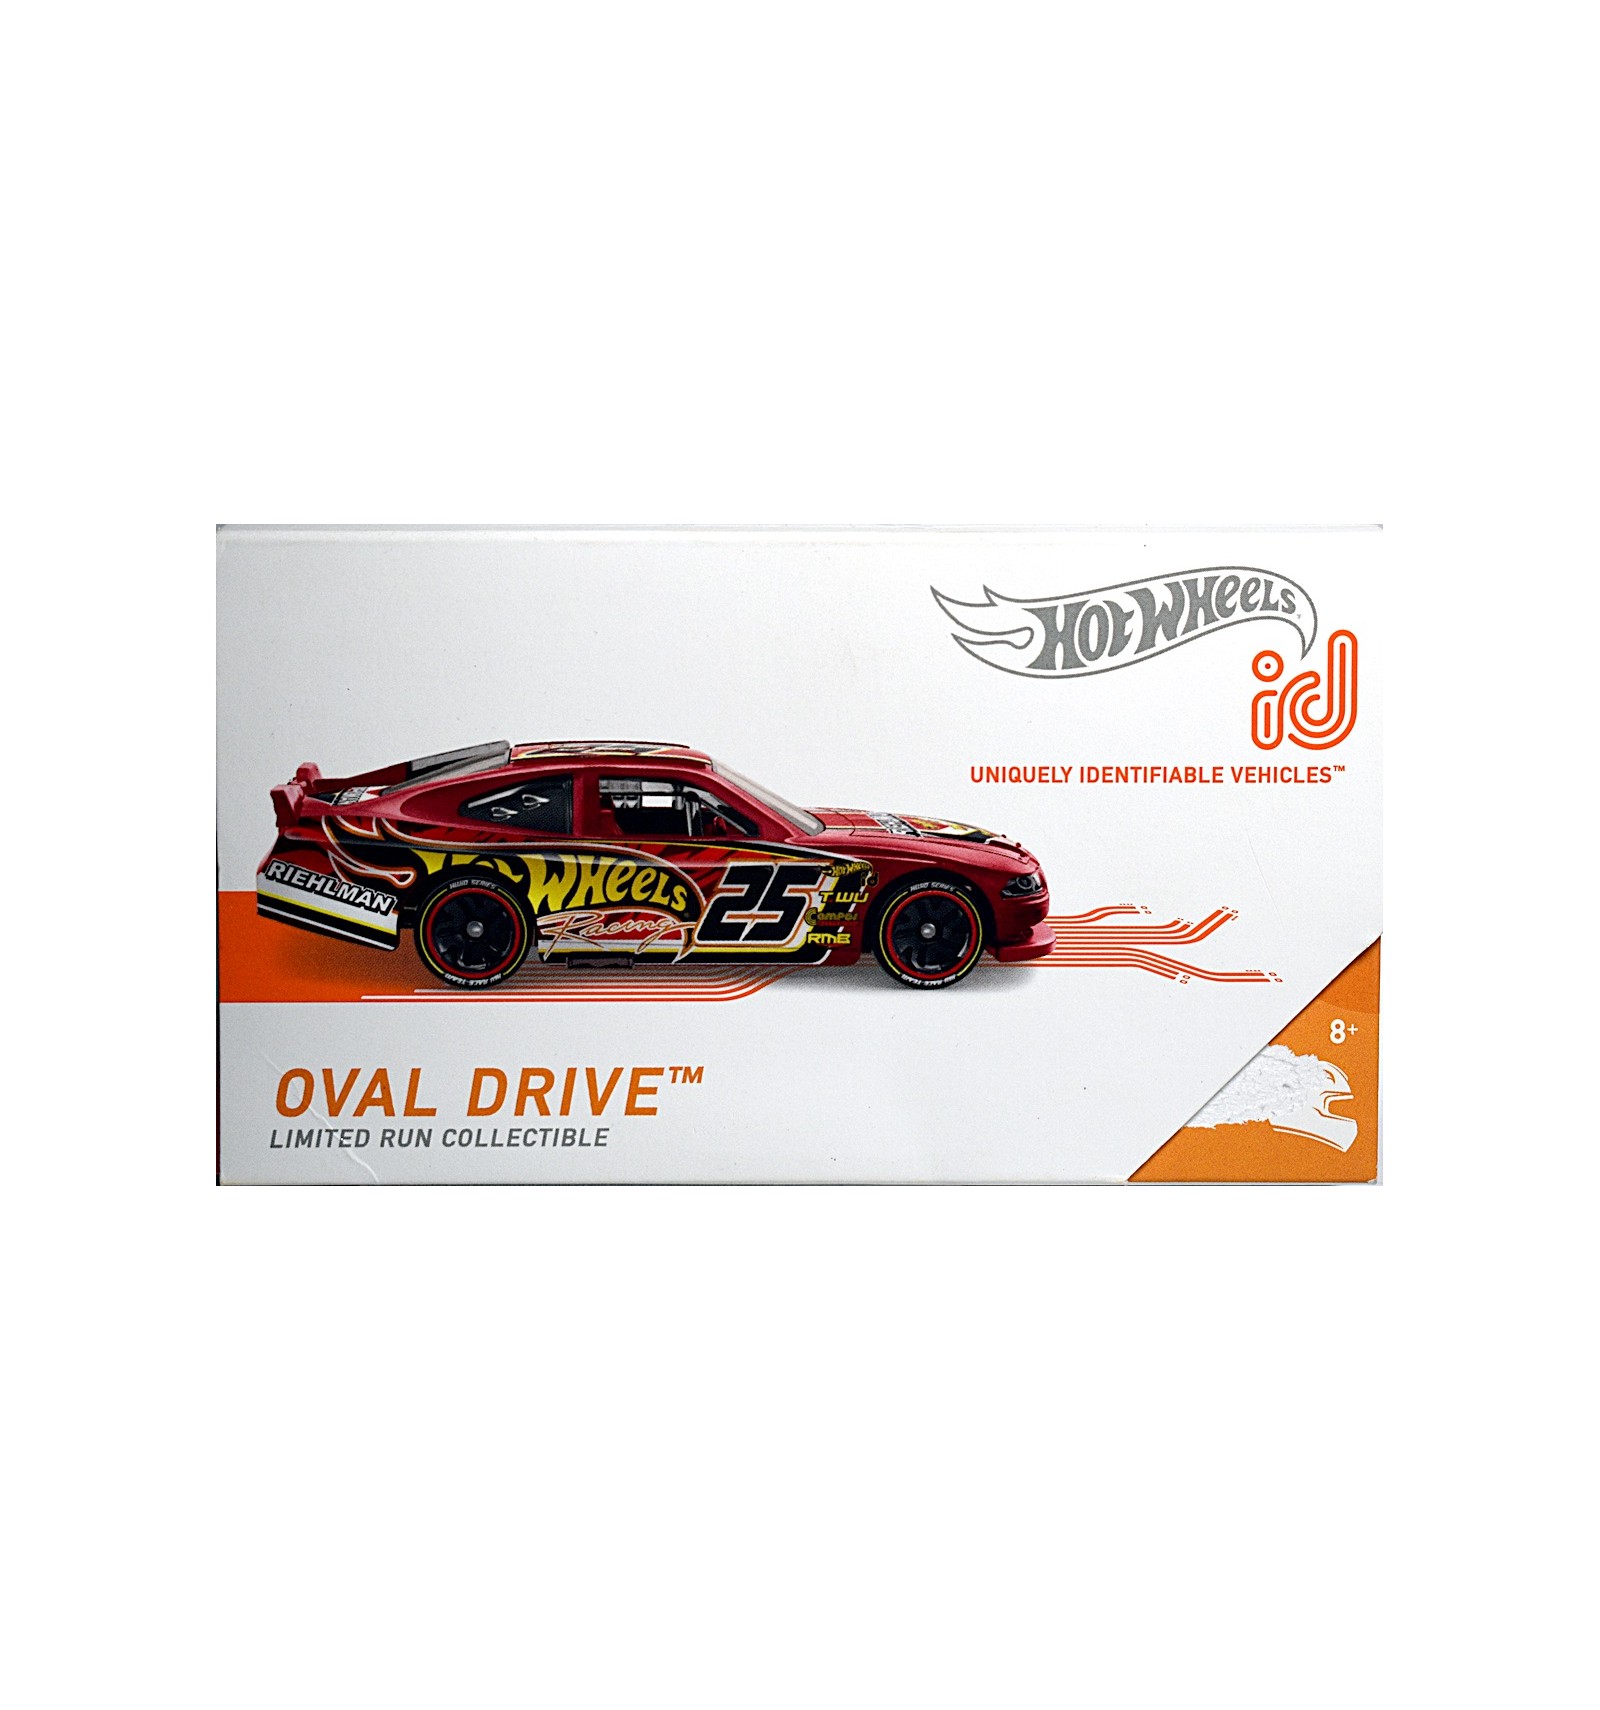 Details about     HOT WHEELS id OVAL DRIVE  DIE-CAST CAR NEW IN BOX 